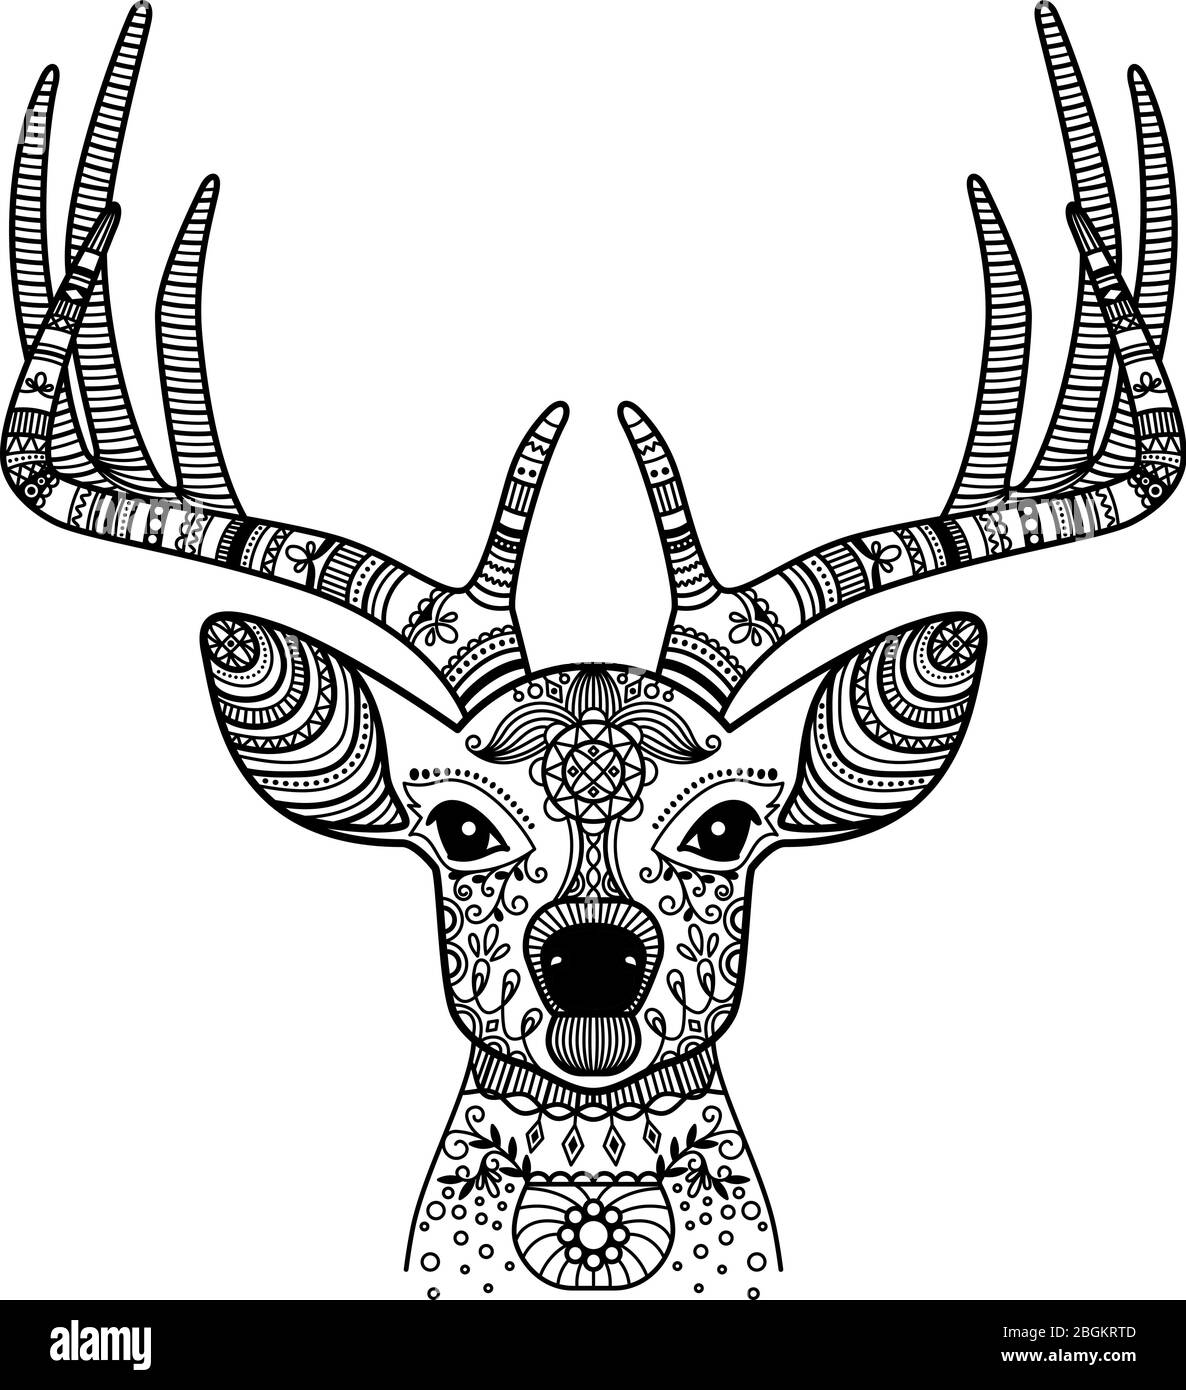 Hand drawn horned deer head with floral ornament, vector illustration. Black image on white background Stock Vector